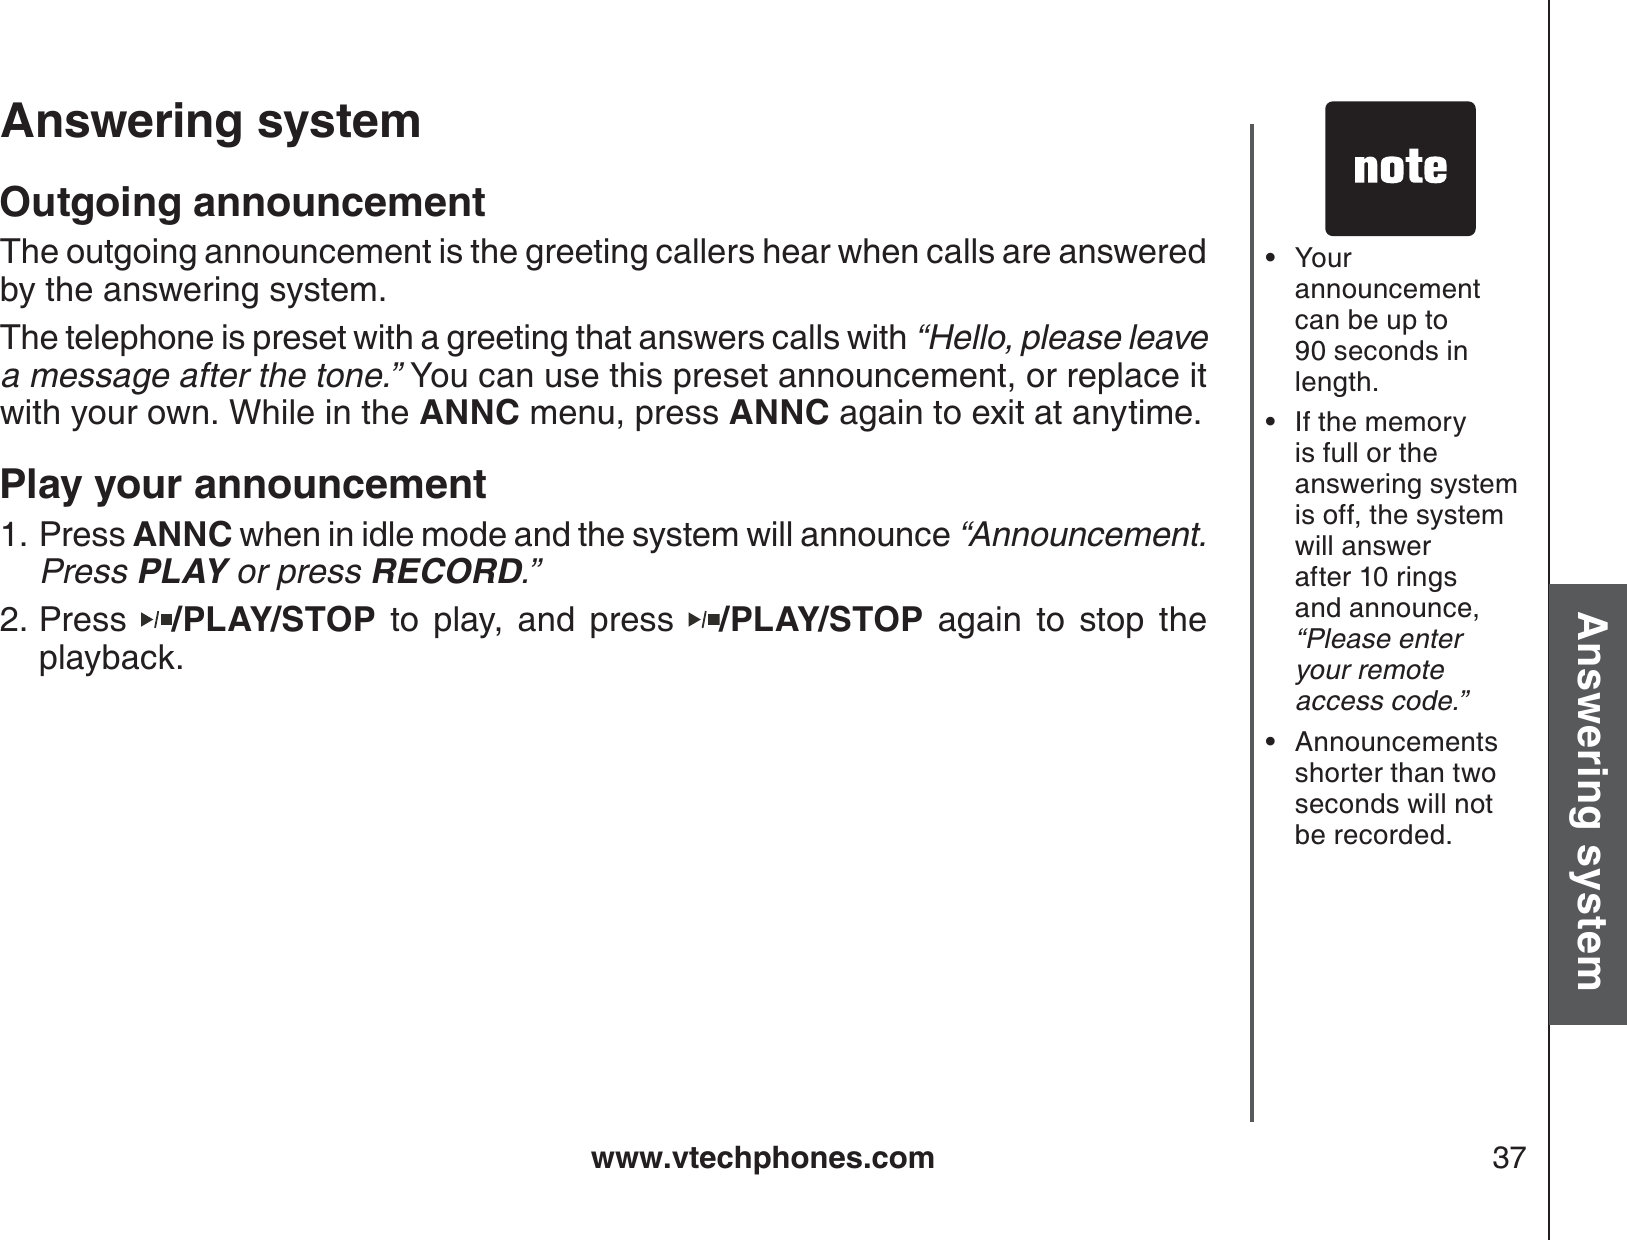 www.vtechphones.com 37Basic operationAnswering systemAnswering system Outgoing announcementThe outgoing announcement is the greeting callers hear when calls are answered by the answering system.The telephone is preset with a greeting that answers calls with “Hello, please leave a message after the tone.” You can use this preset announcement, or replace itwith your own. While in the ANNC menu, press ANNC again to exit at anytime.Play your announcement Press ANNC when in idle mode and the system will announce “Announcement.  Press PLAY or press RECORD.”Press /PLAY/STOP to play, and press  /PLAY/STOP again to stop the playback.  1.2.Your  announcement can be up to 90 seconds inlength.If the memory is full or the answering system is off, the system will answer after 10 rings and announce, “Please enter your remote access code.”Announcements shorter than two seconds will not be recorded.•••